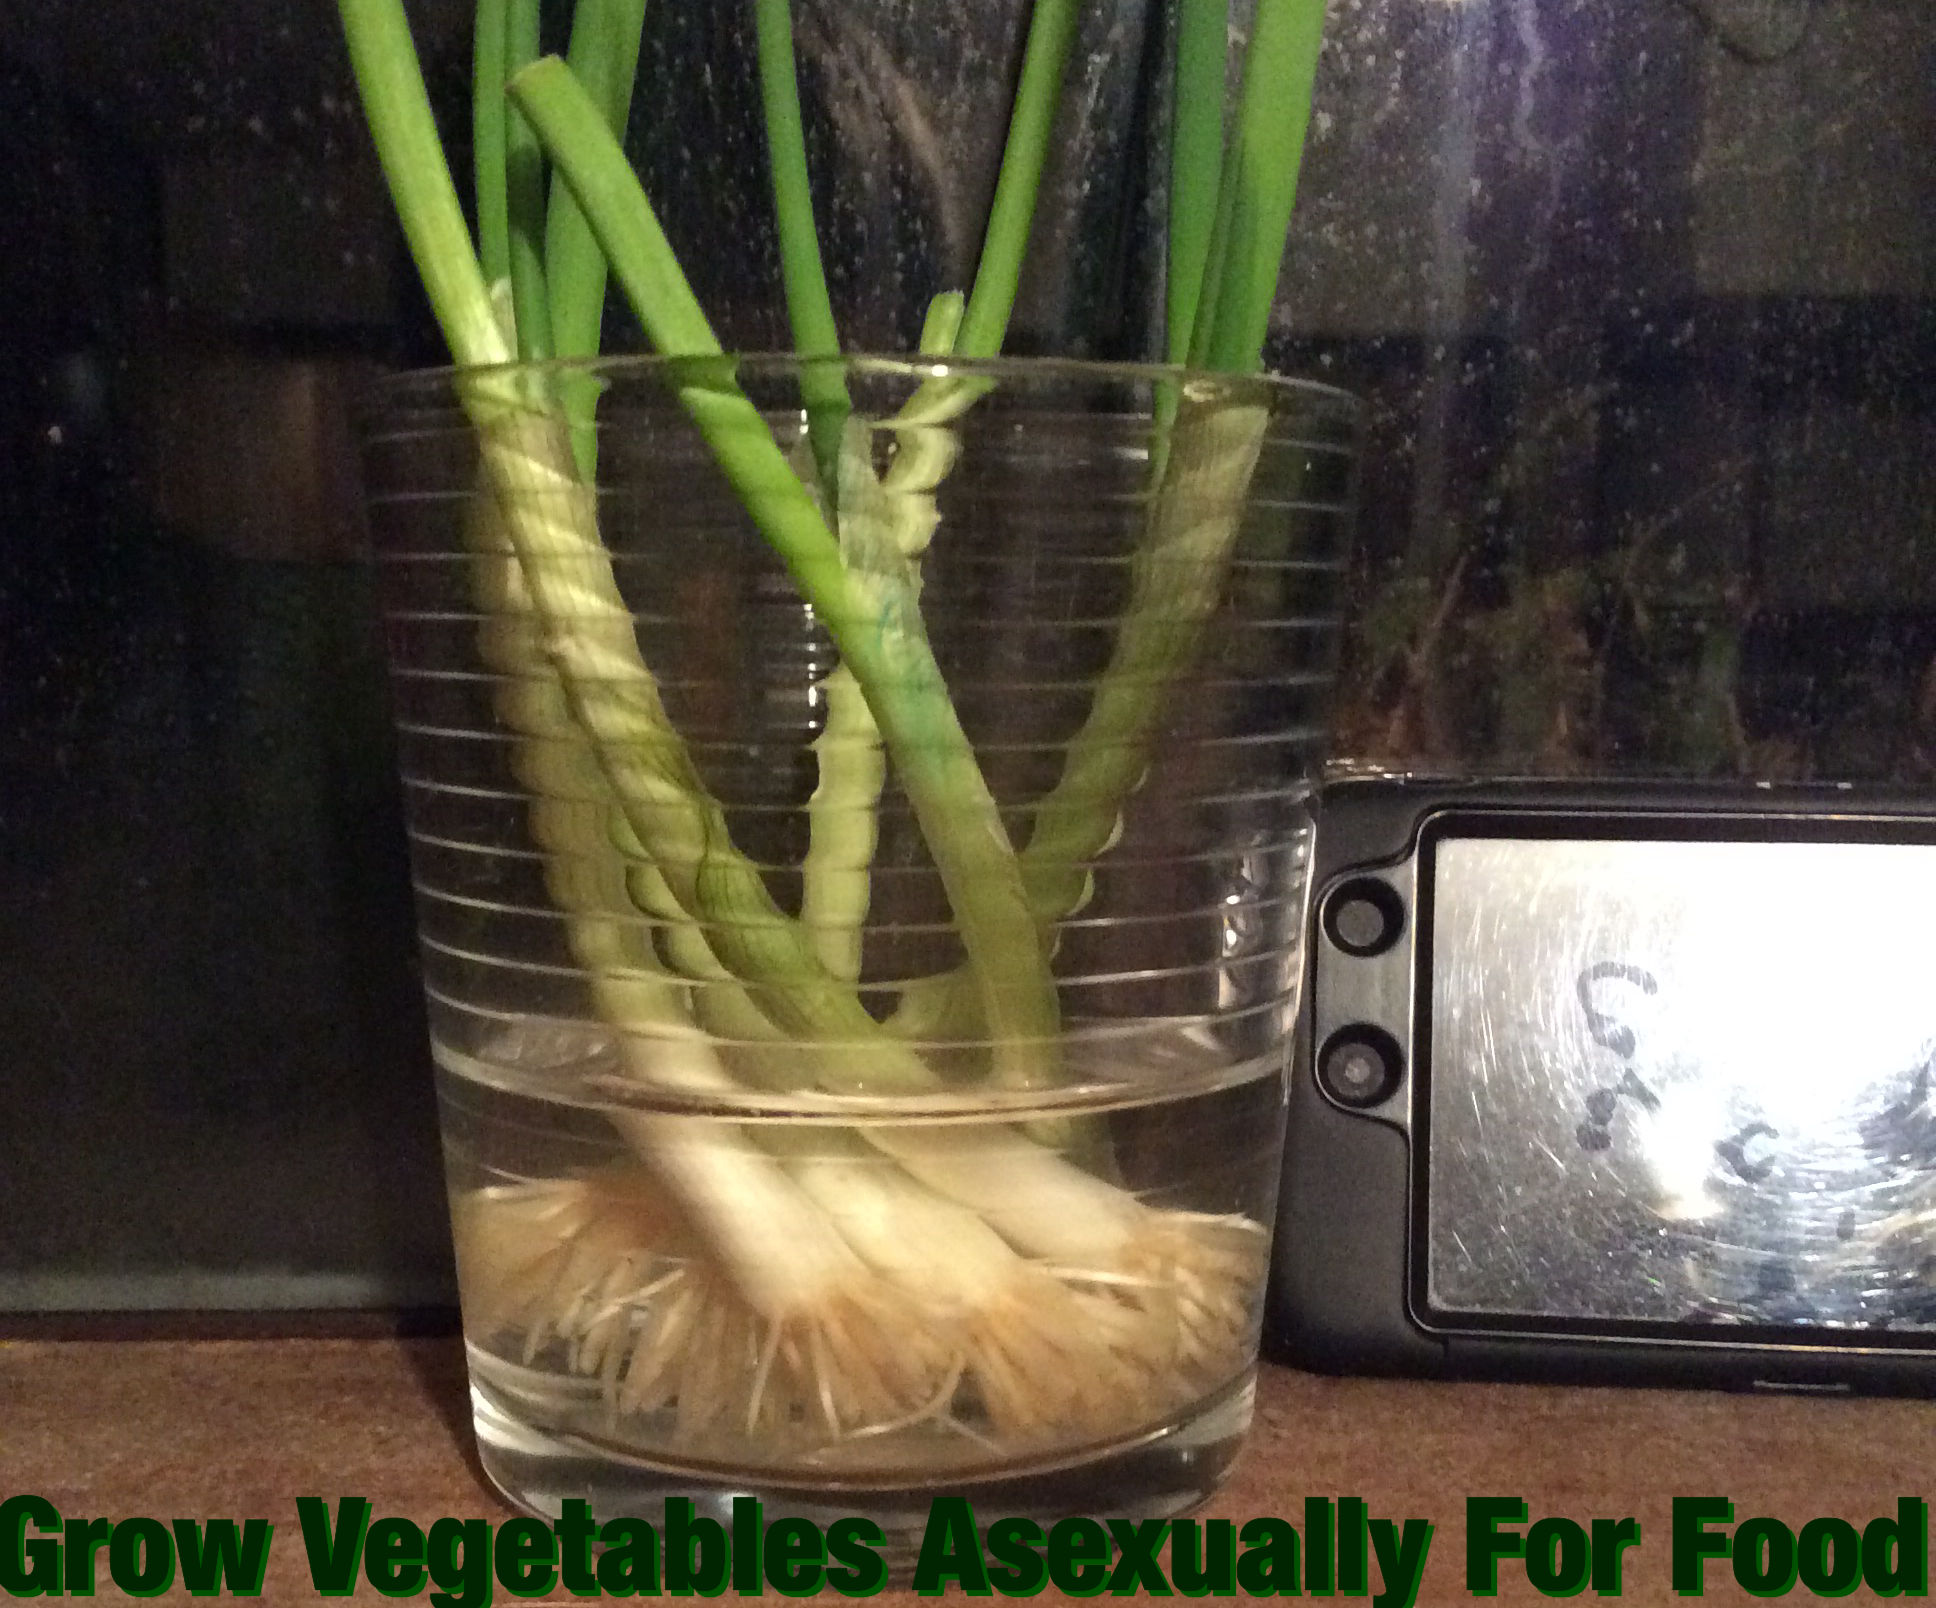 Grow Vegetables Asexually For The Apocalypse